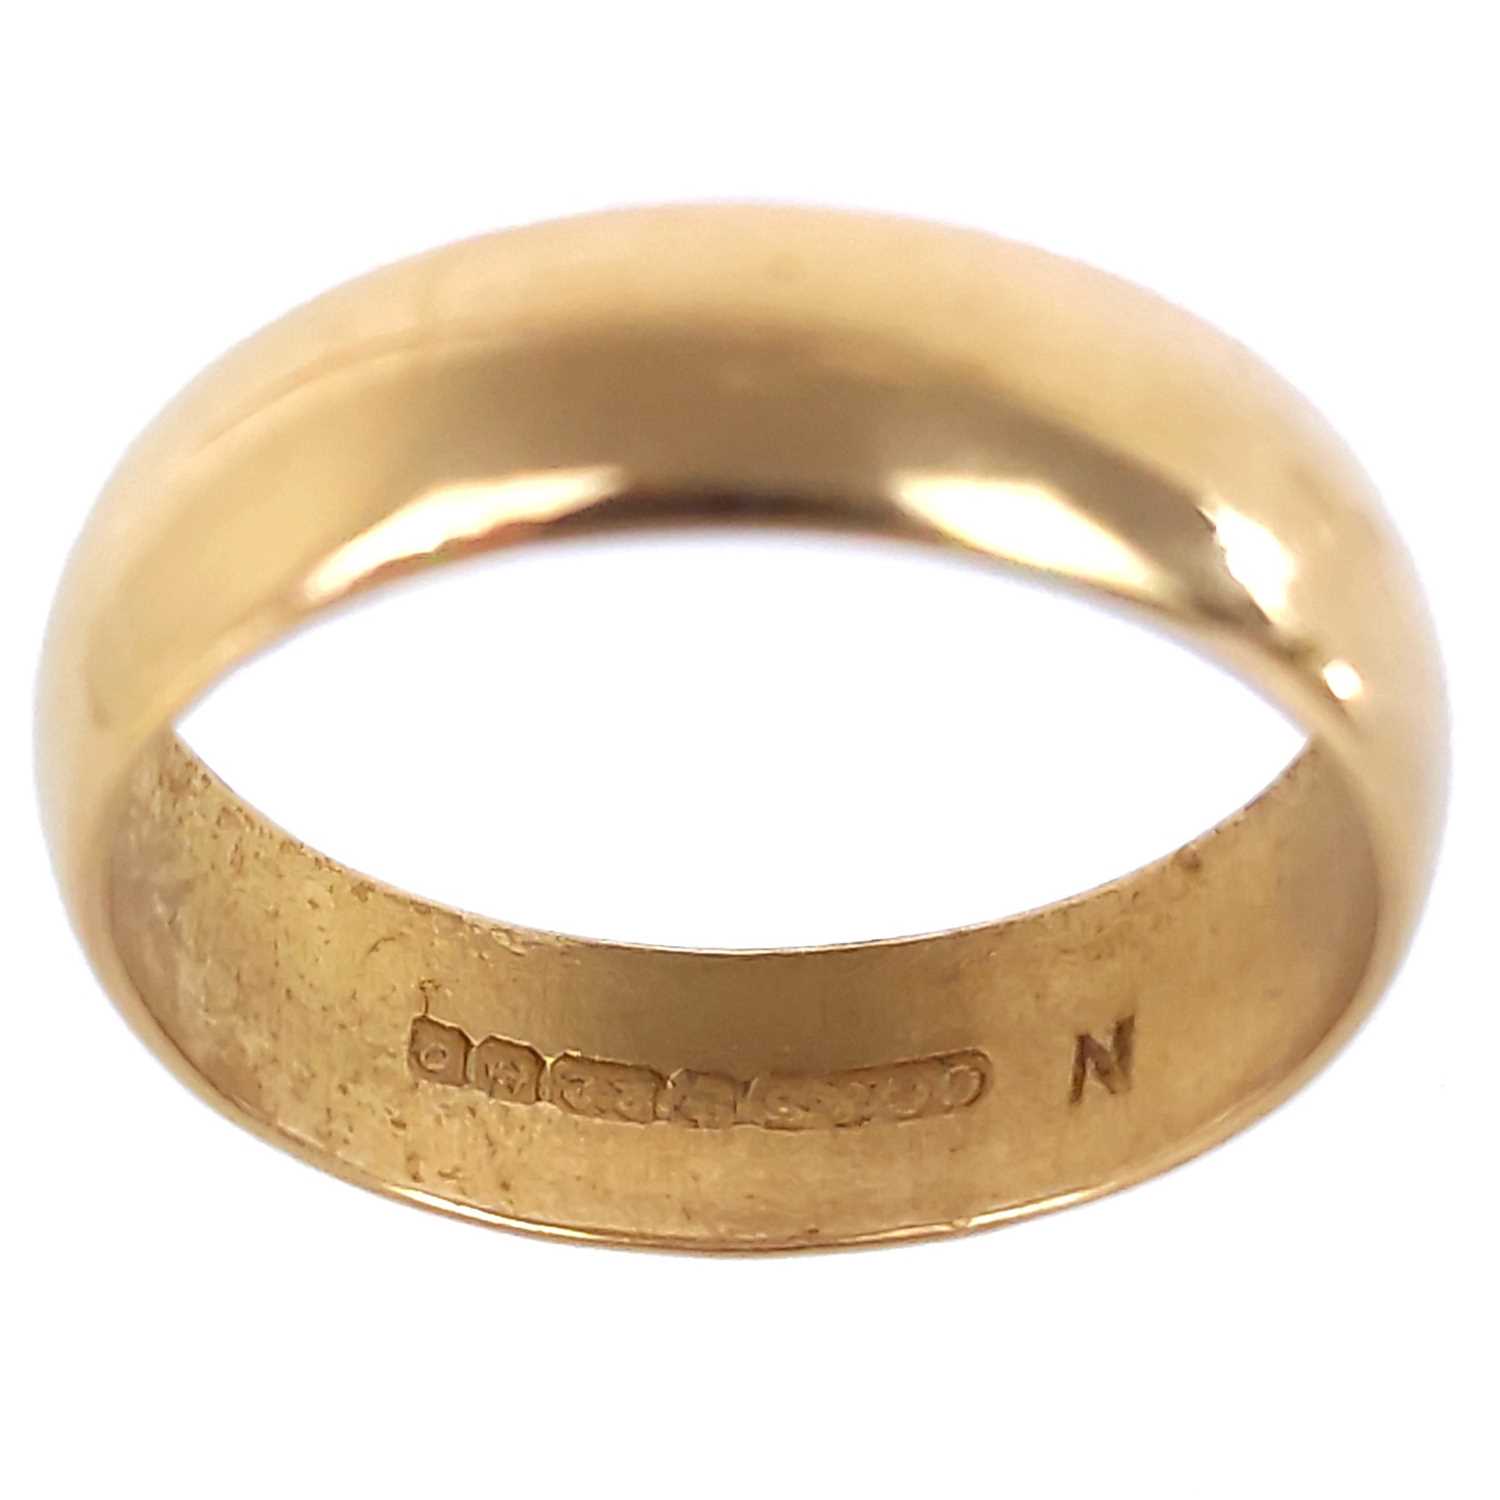 A 22ct hallmarked gold band ring. - Image 3 of 3